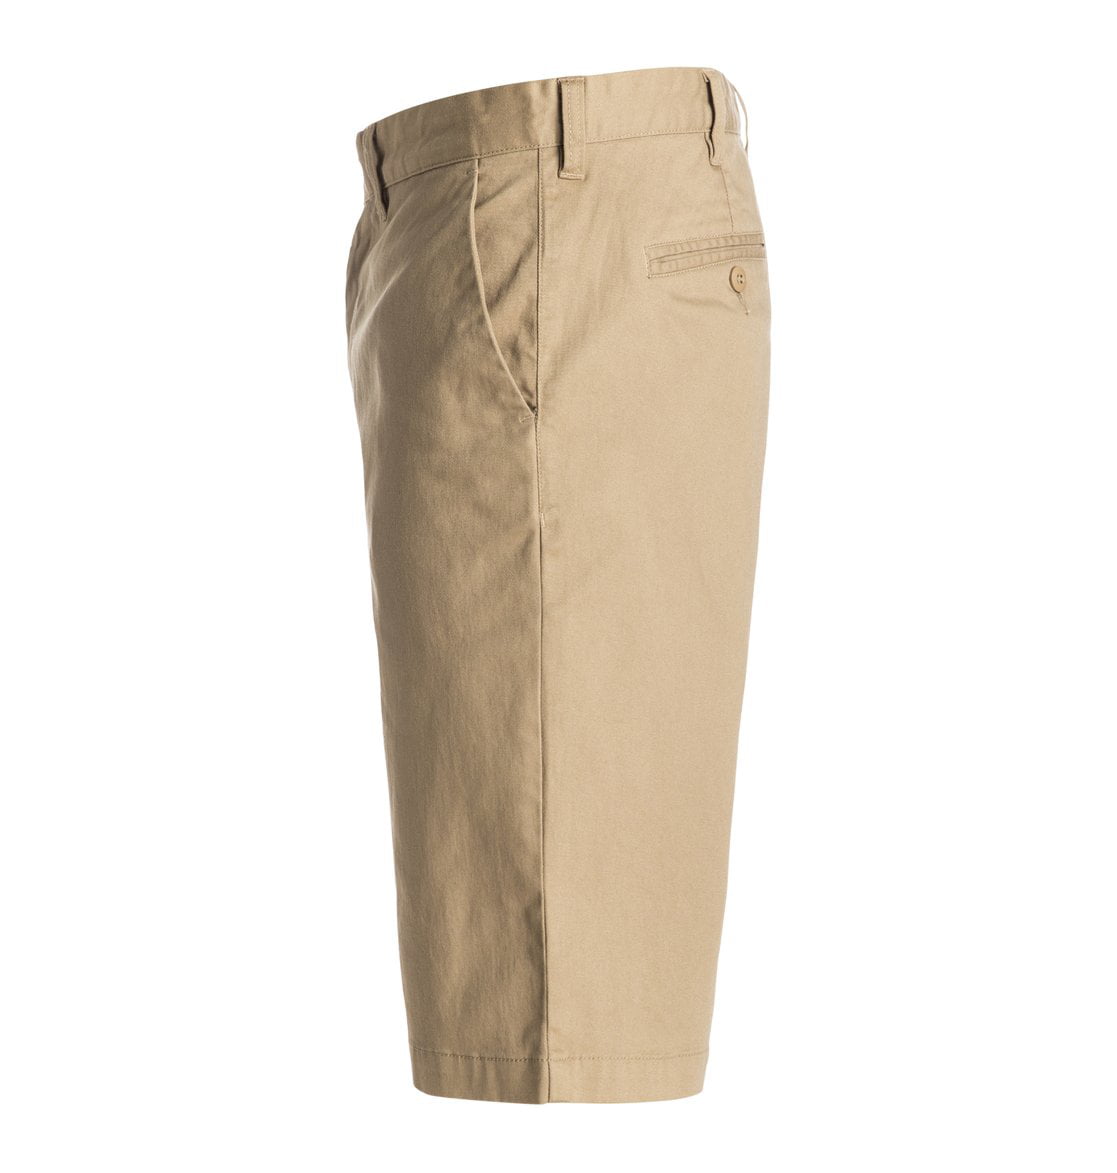 DC Mens Worker Roomy 22 Shorts 